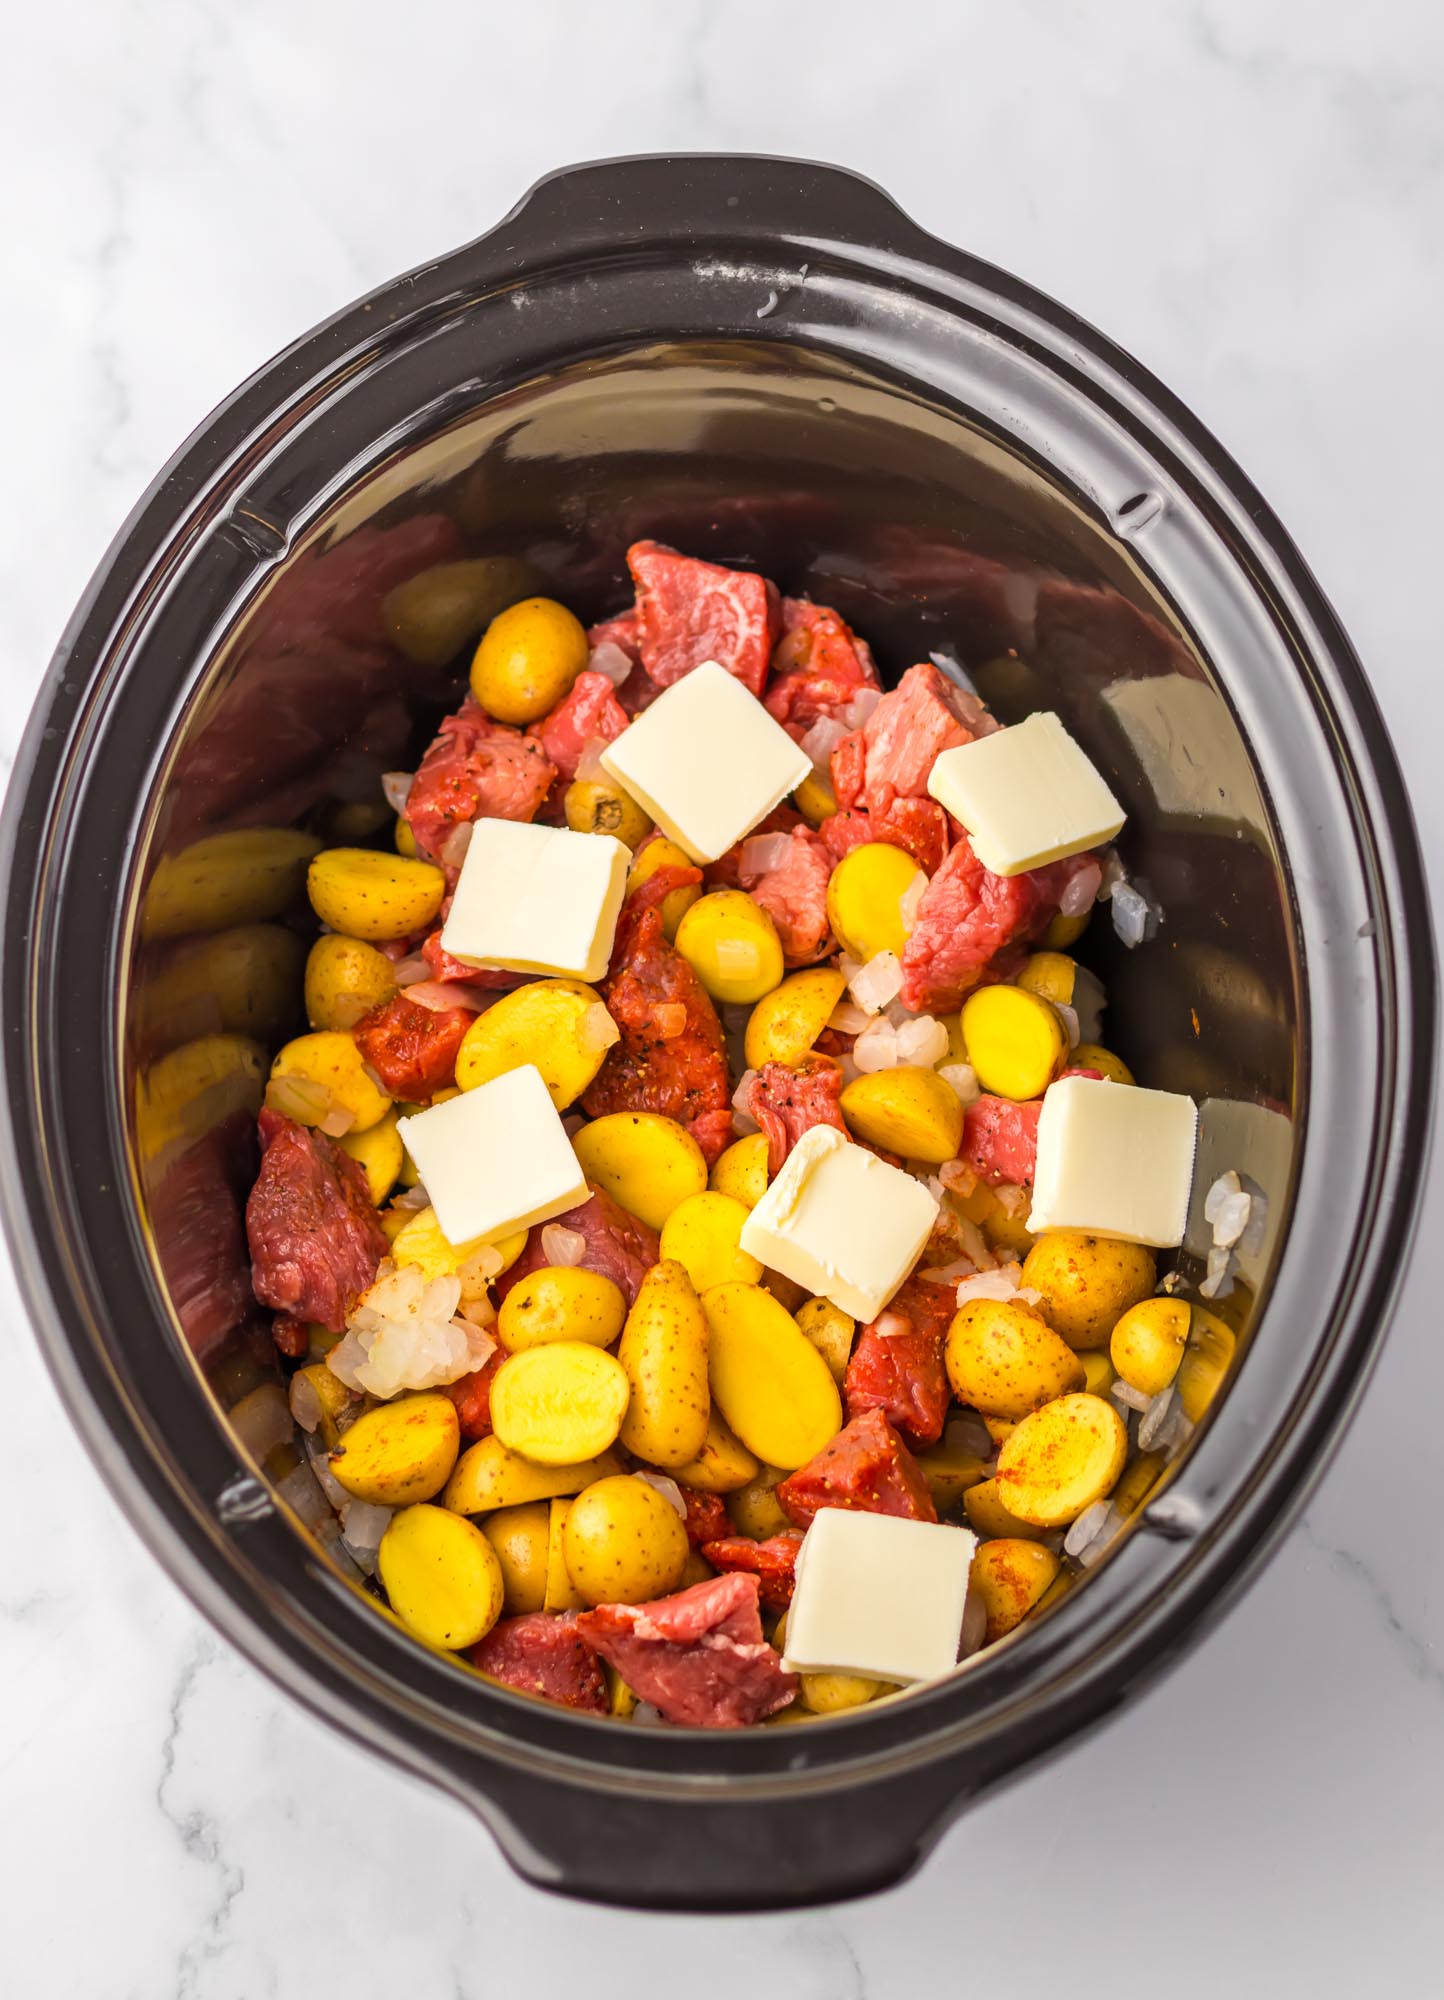 Steak, potatoes and butter in a slow cooker